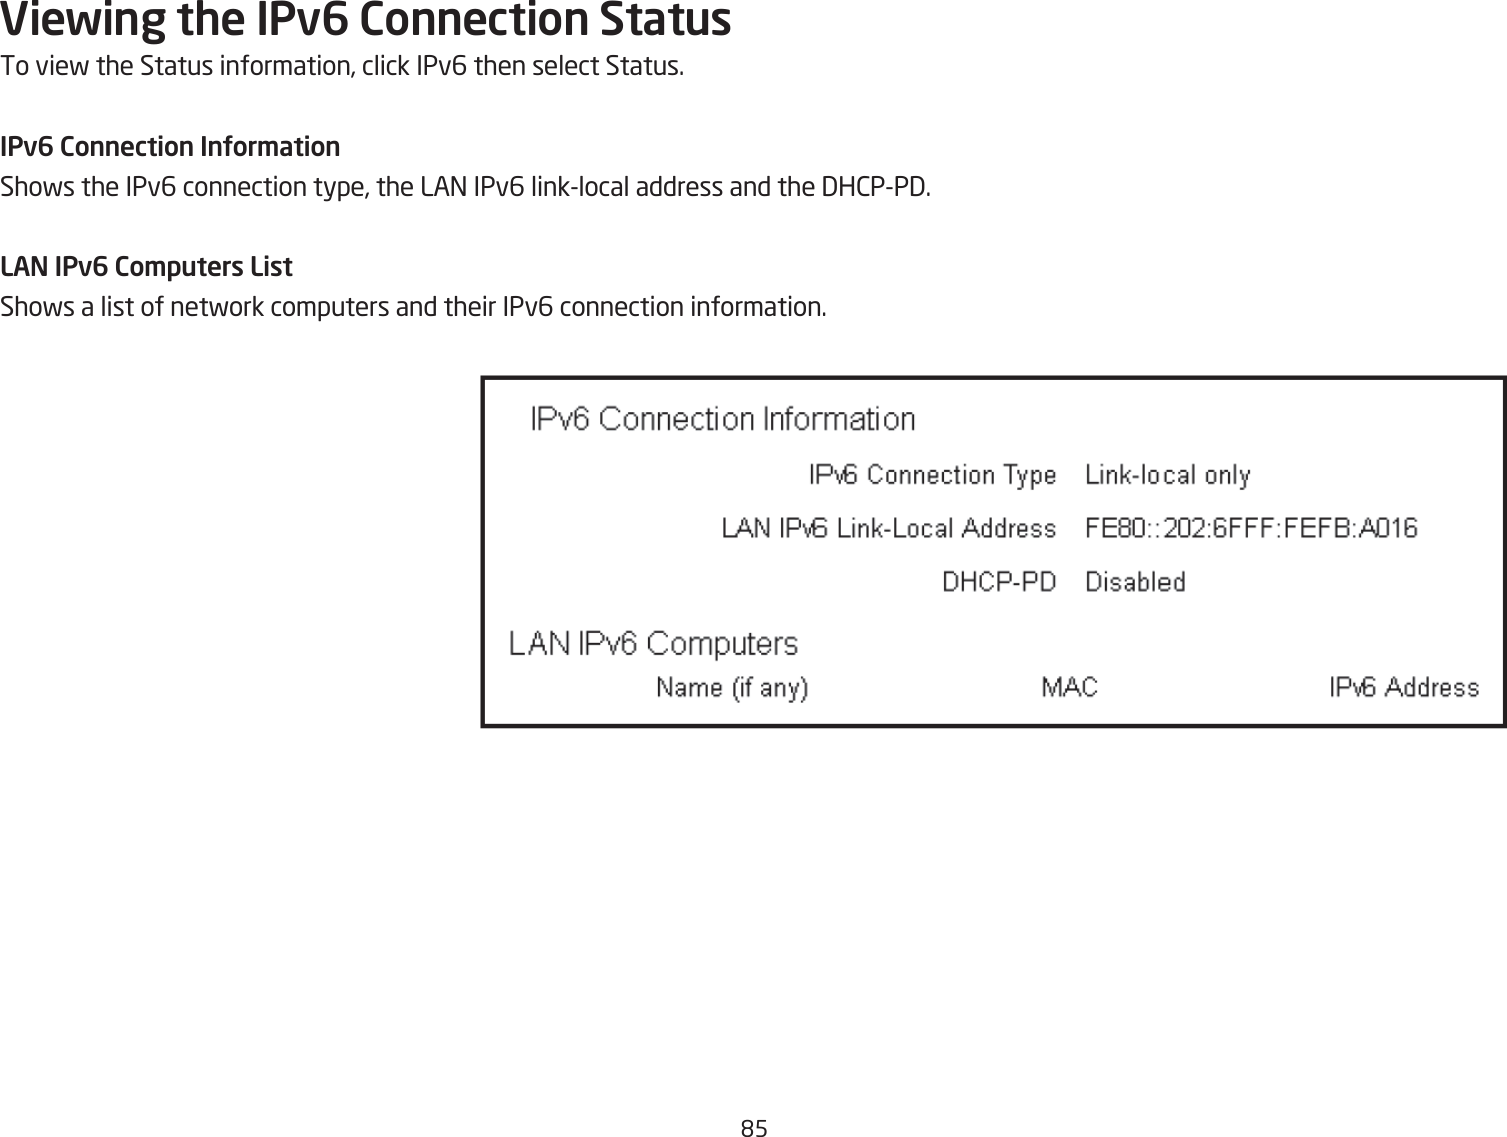 &apos;5Viewing the IPv6 Connection StatusTo vief the Status information, click IPv6 then select Status.IPv6 Connection InUor\ationShofs the IPv6 connection type, the LA= IPv6 linklocal address and the 3H2PP3.LAN IPv6 Co\puters ListShofs a list of netfork computers and their IPv6 connection information.